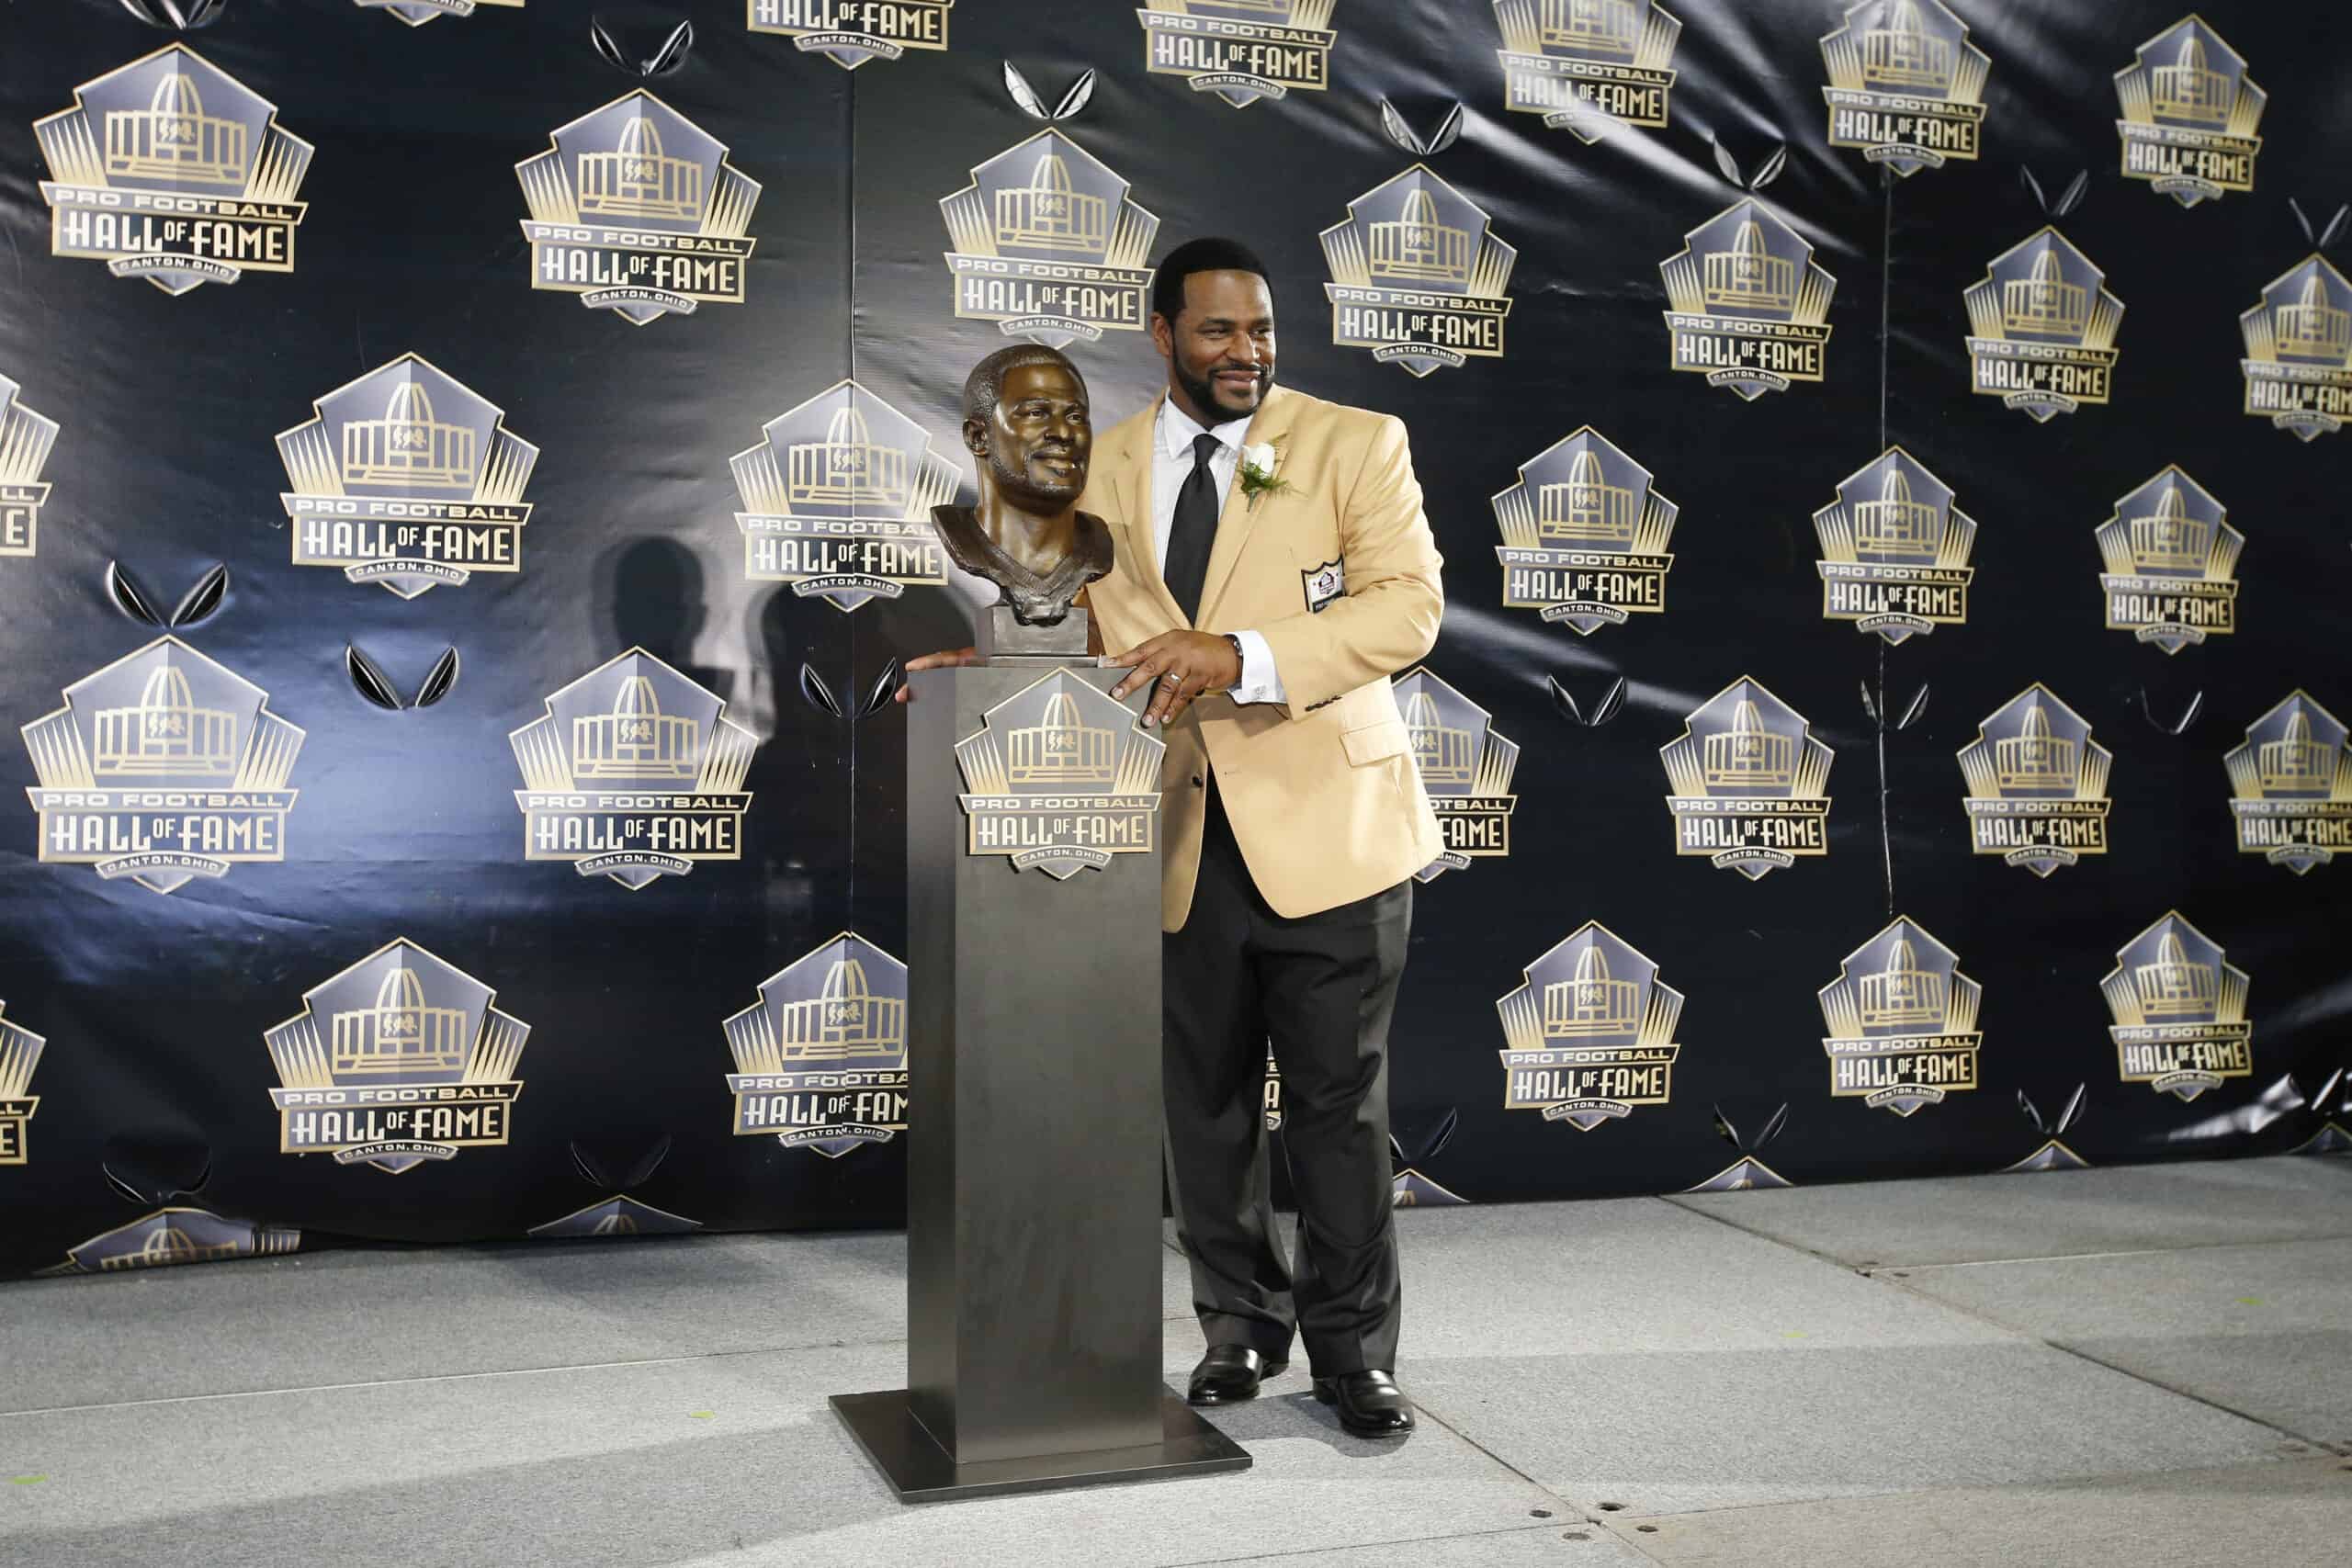 CANTON, OH - AUGUST 8: Jerome Bettis poses with his bust during the NFL Hall of Fame induction ceremony at Tom Benson Hall of Fame Stadium on August 8, 2015 in Canton, Ohio. (Photo by Joe Robbins/Getty Images)